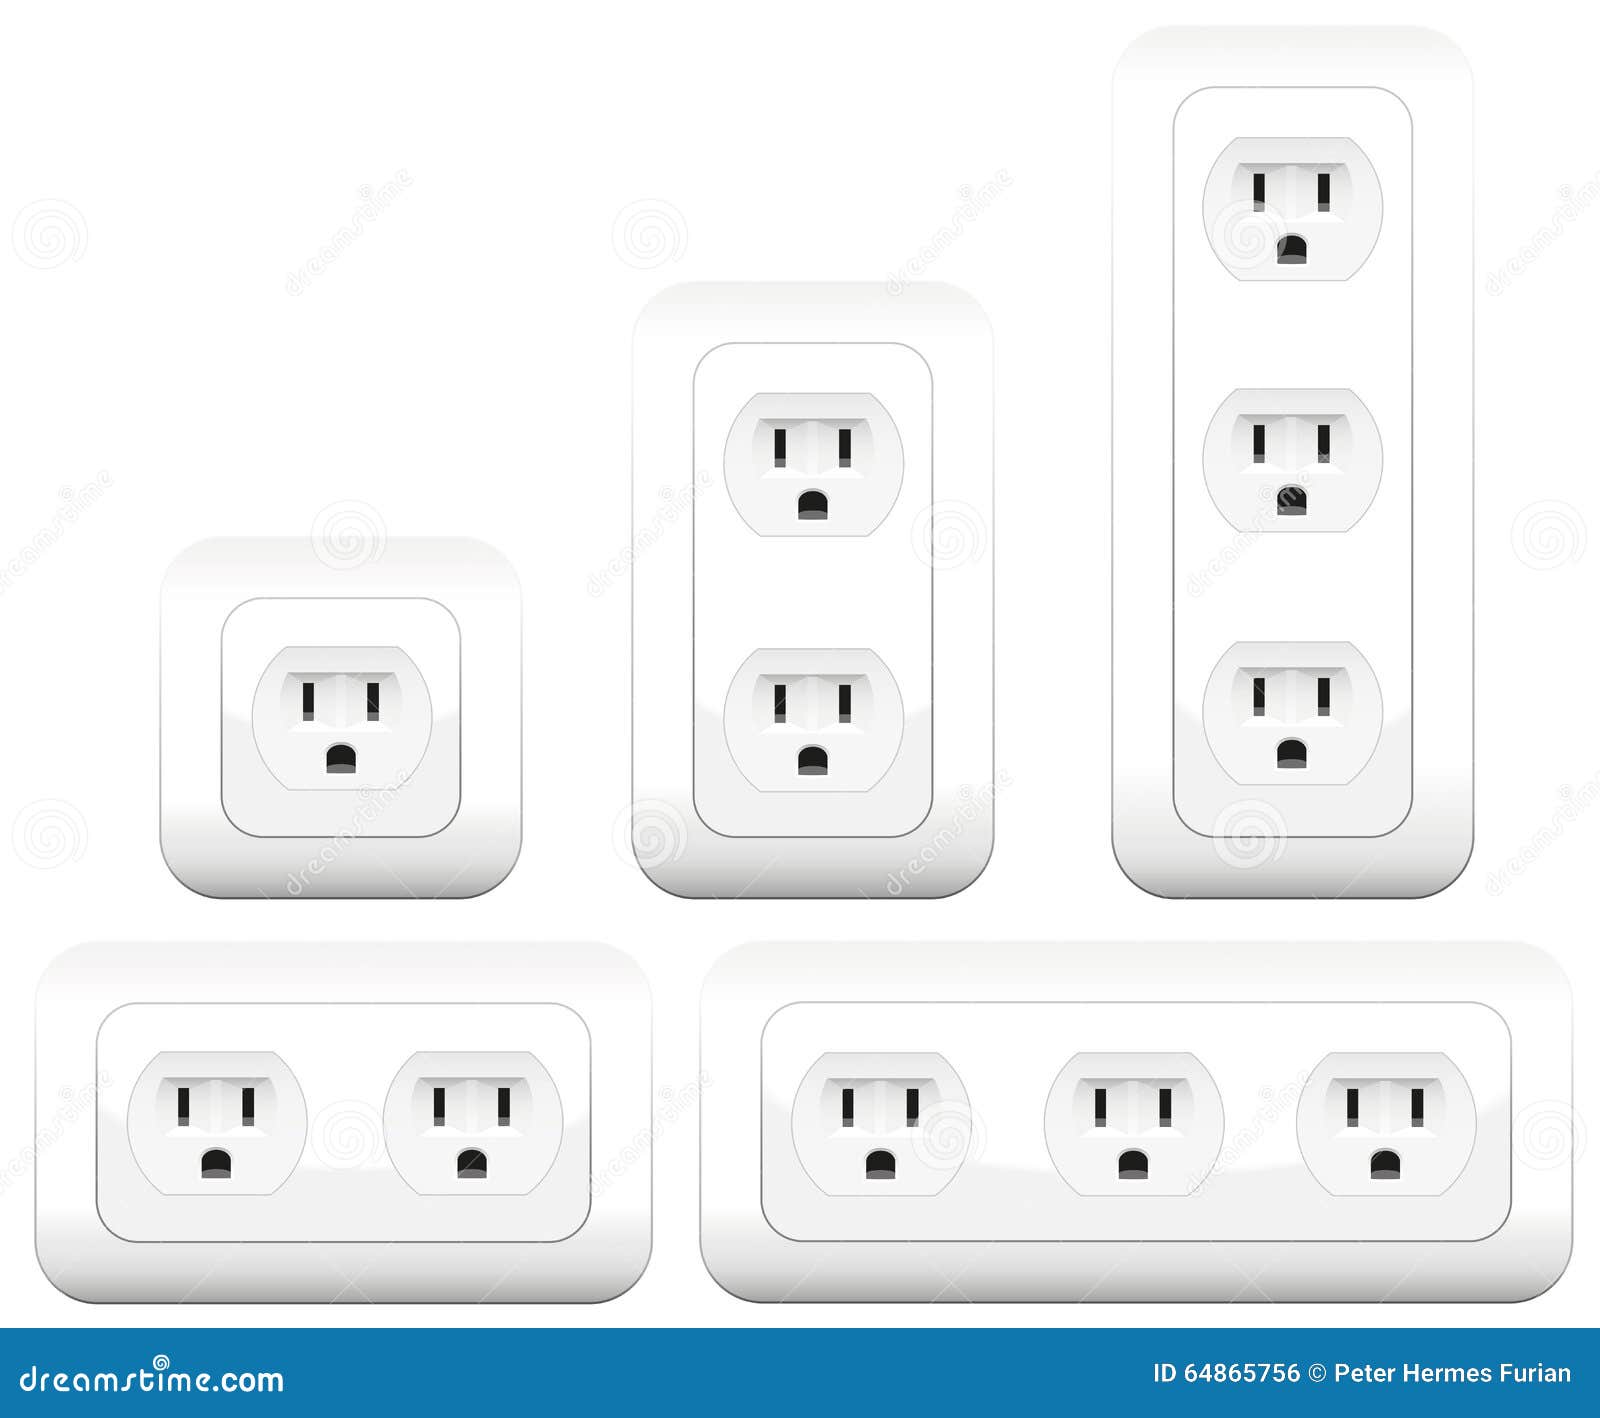 sockets outlets variations double triple